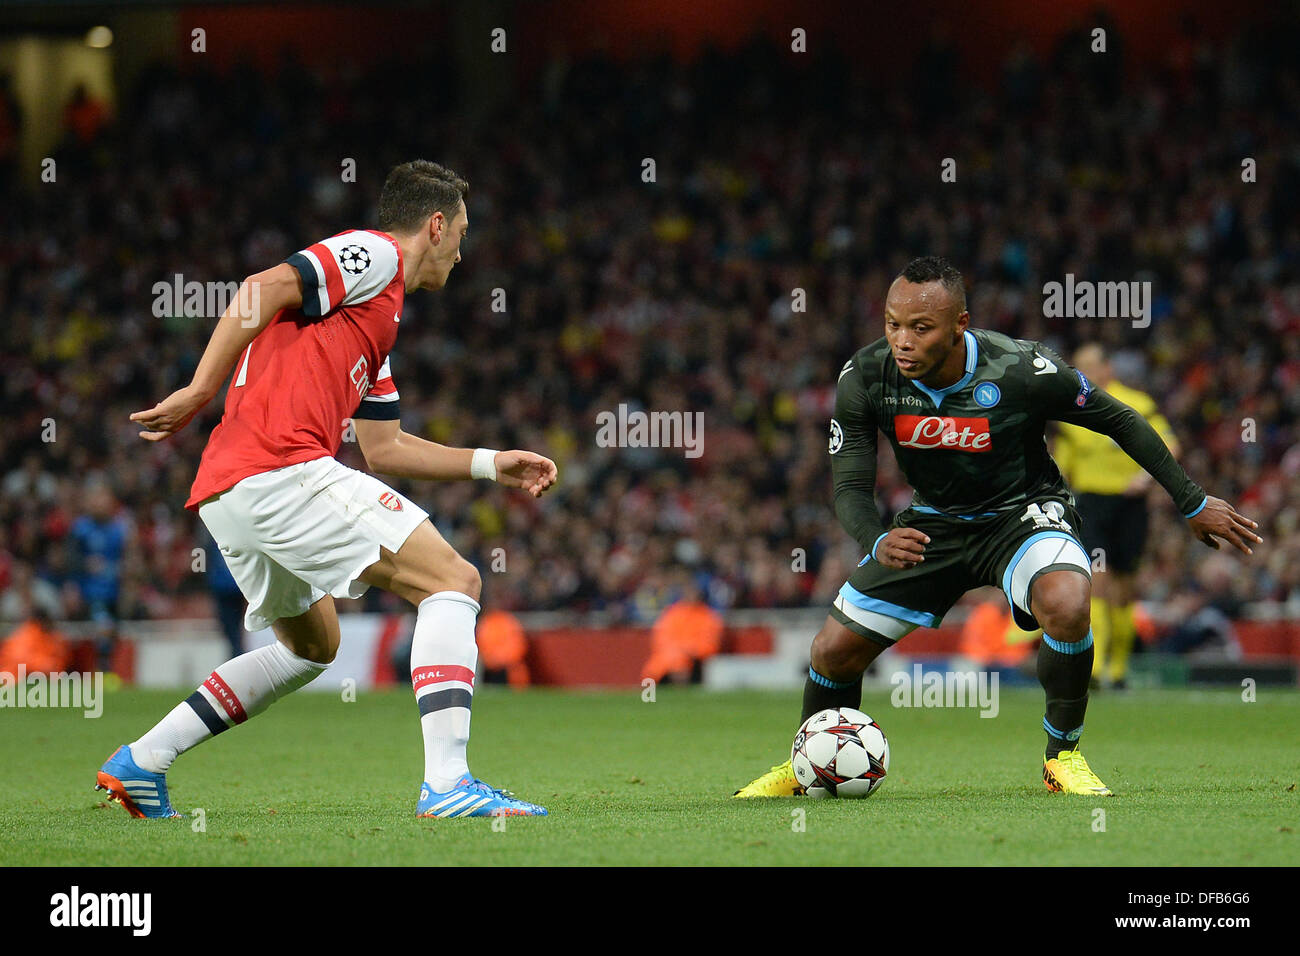 London, UK. 01st Oct, 2013. Arsenal's midfielder Mesut Ozil from Germany and Napoli's defender Camilo Zuniga from Columbia during the UEFA Champions League match between Arsenal from England and Napoli from Italy played at The Emirates Stadium, on October 01, 2013 in London, England. © Mitchell Gunn/ESPA/Alamy Live News Stock Photo